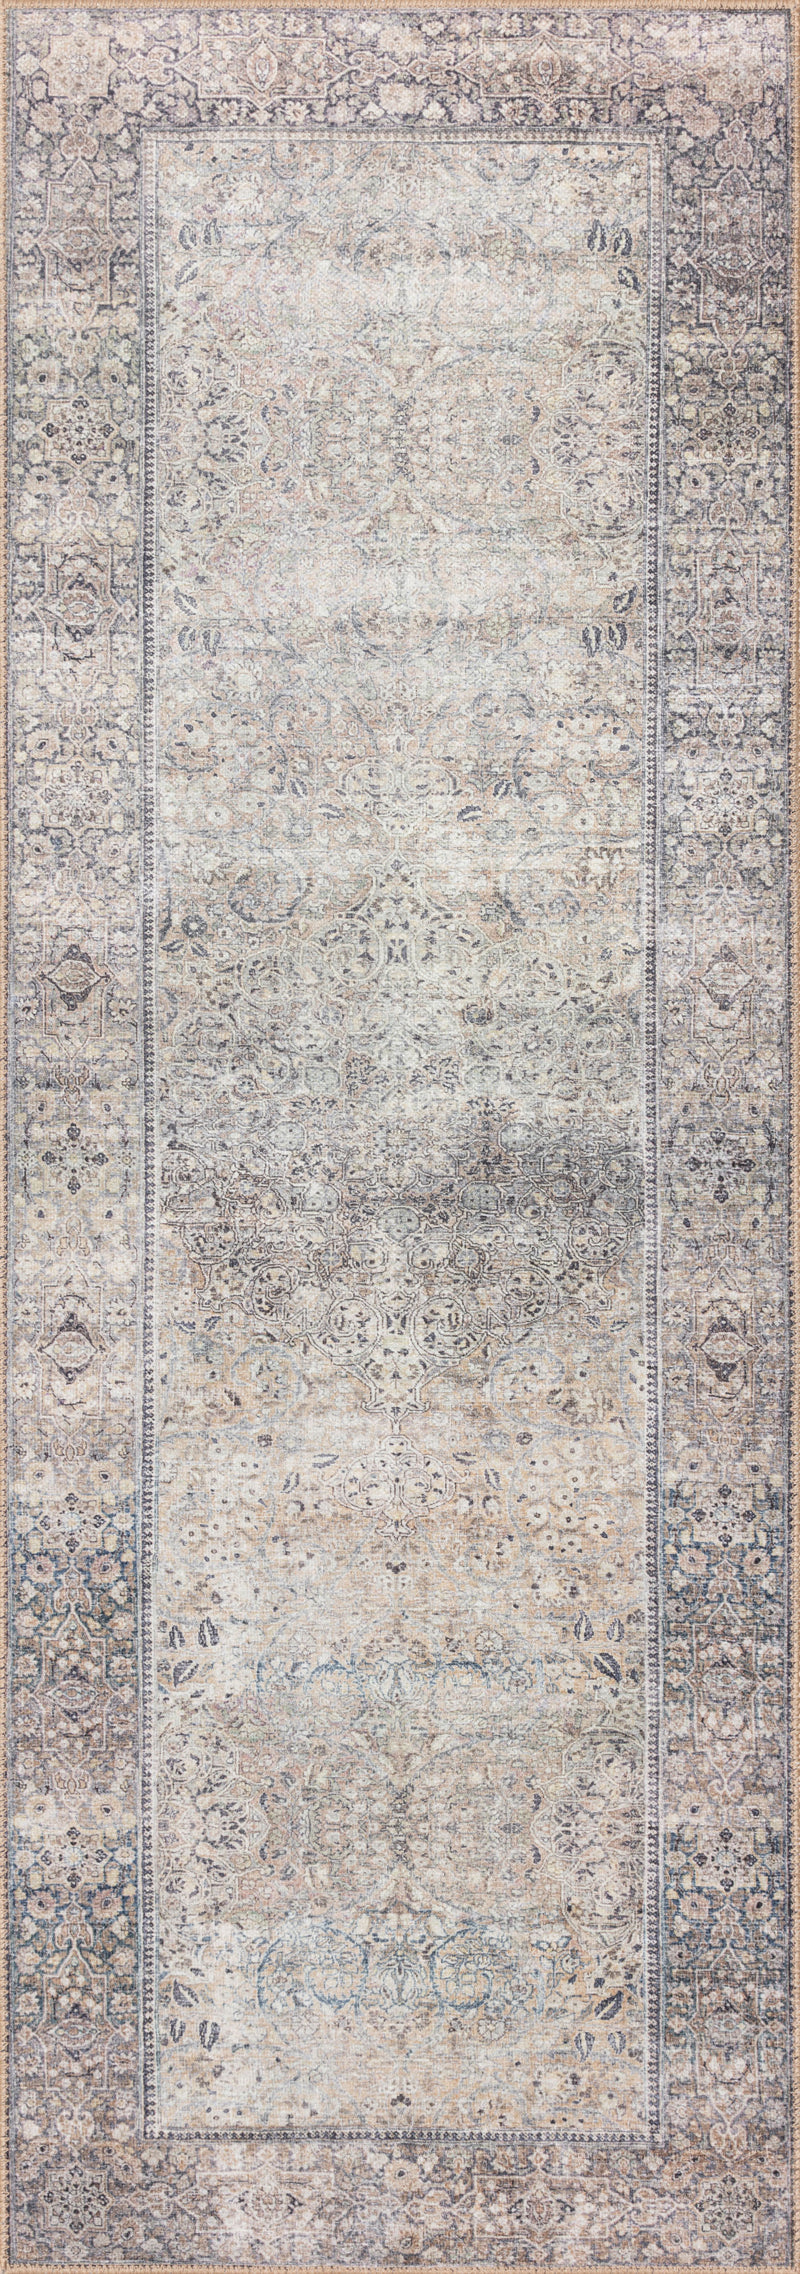 WYNTER Collection Rug  in  Silver / Charcoal Gray Accent Power-Loomed Polyester